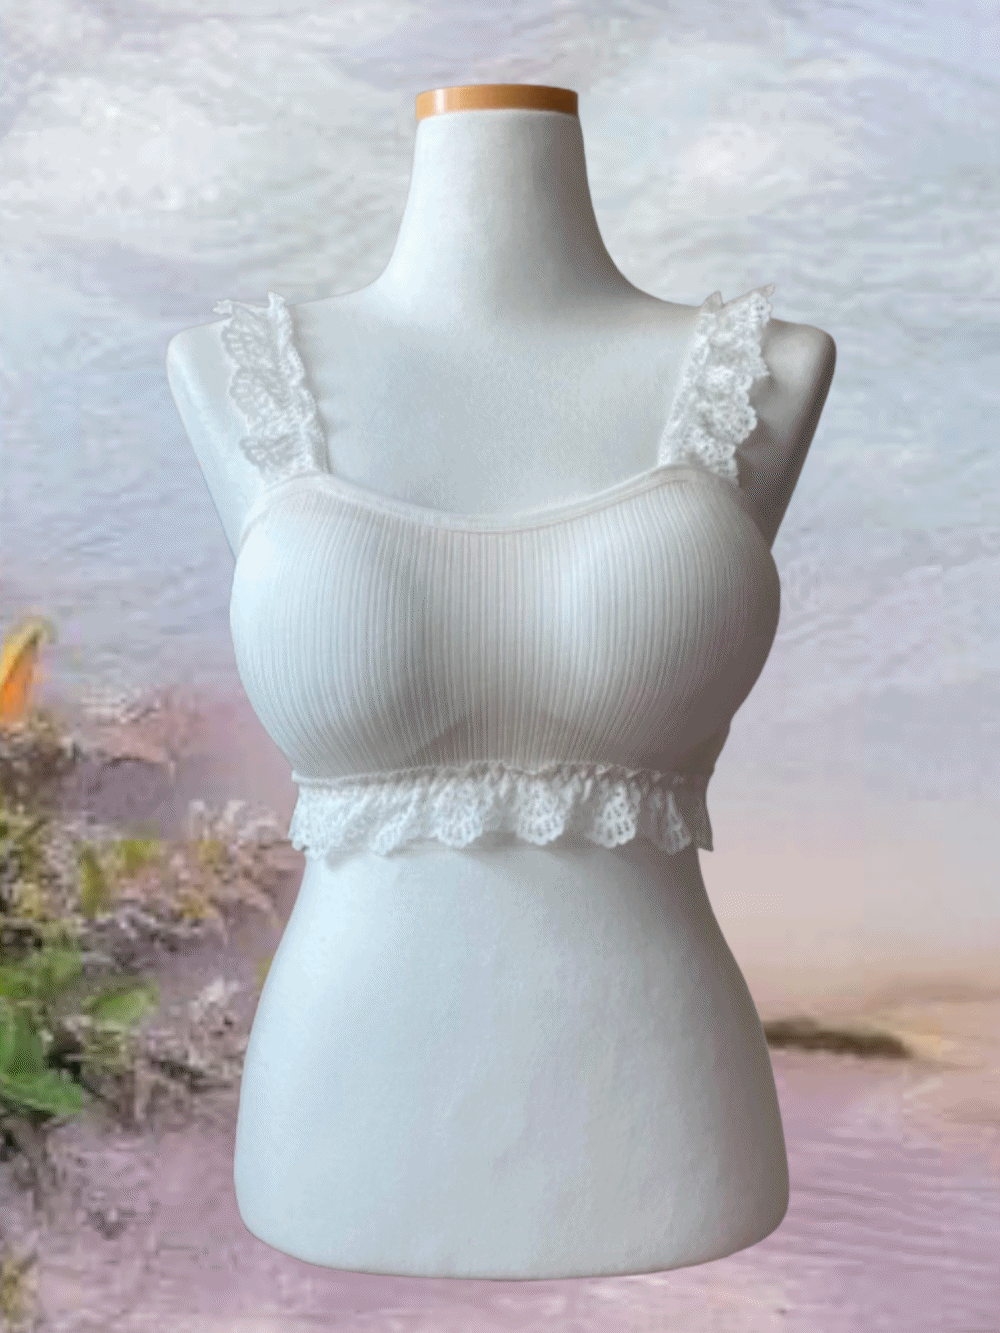 (REORDER!) [Innerwear] Fluffy Lace bralette / 3 colors